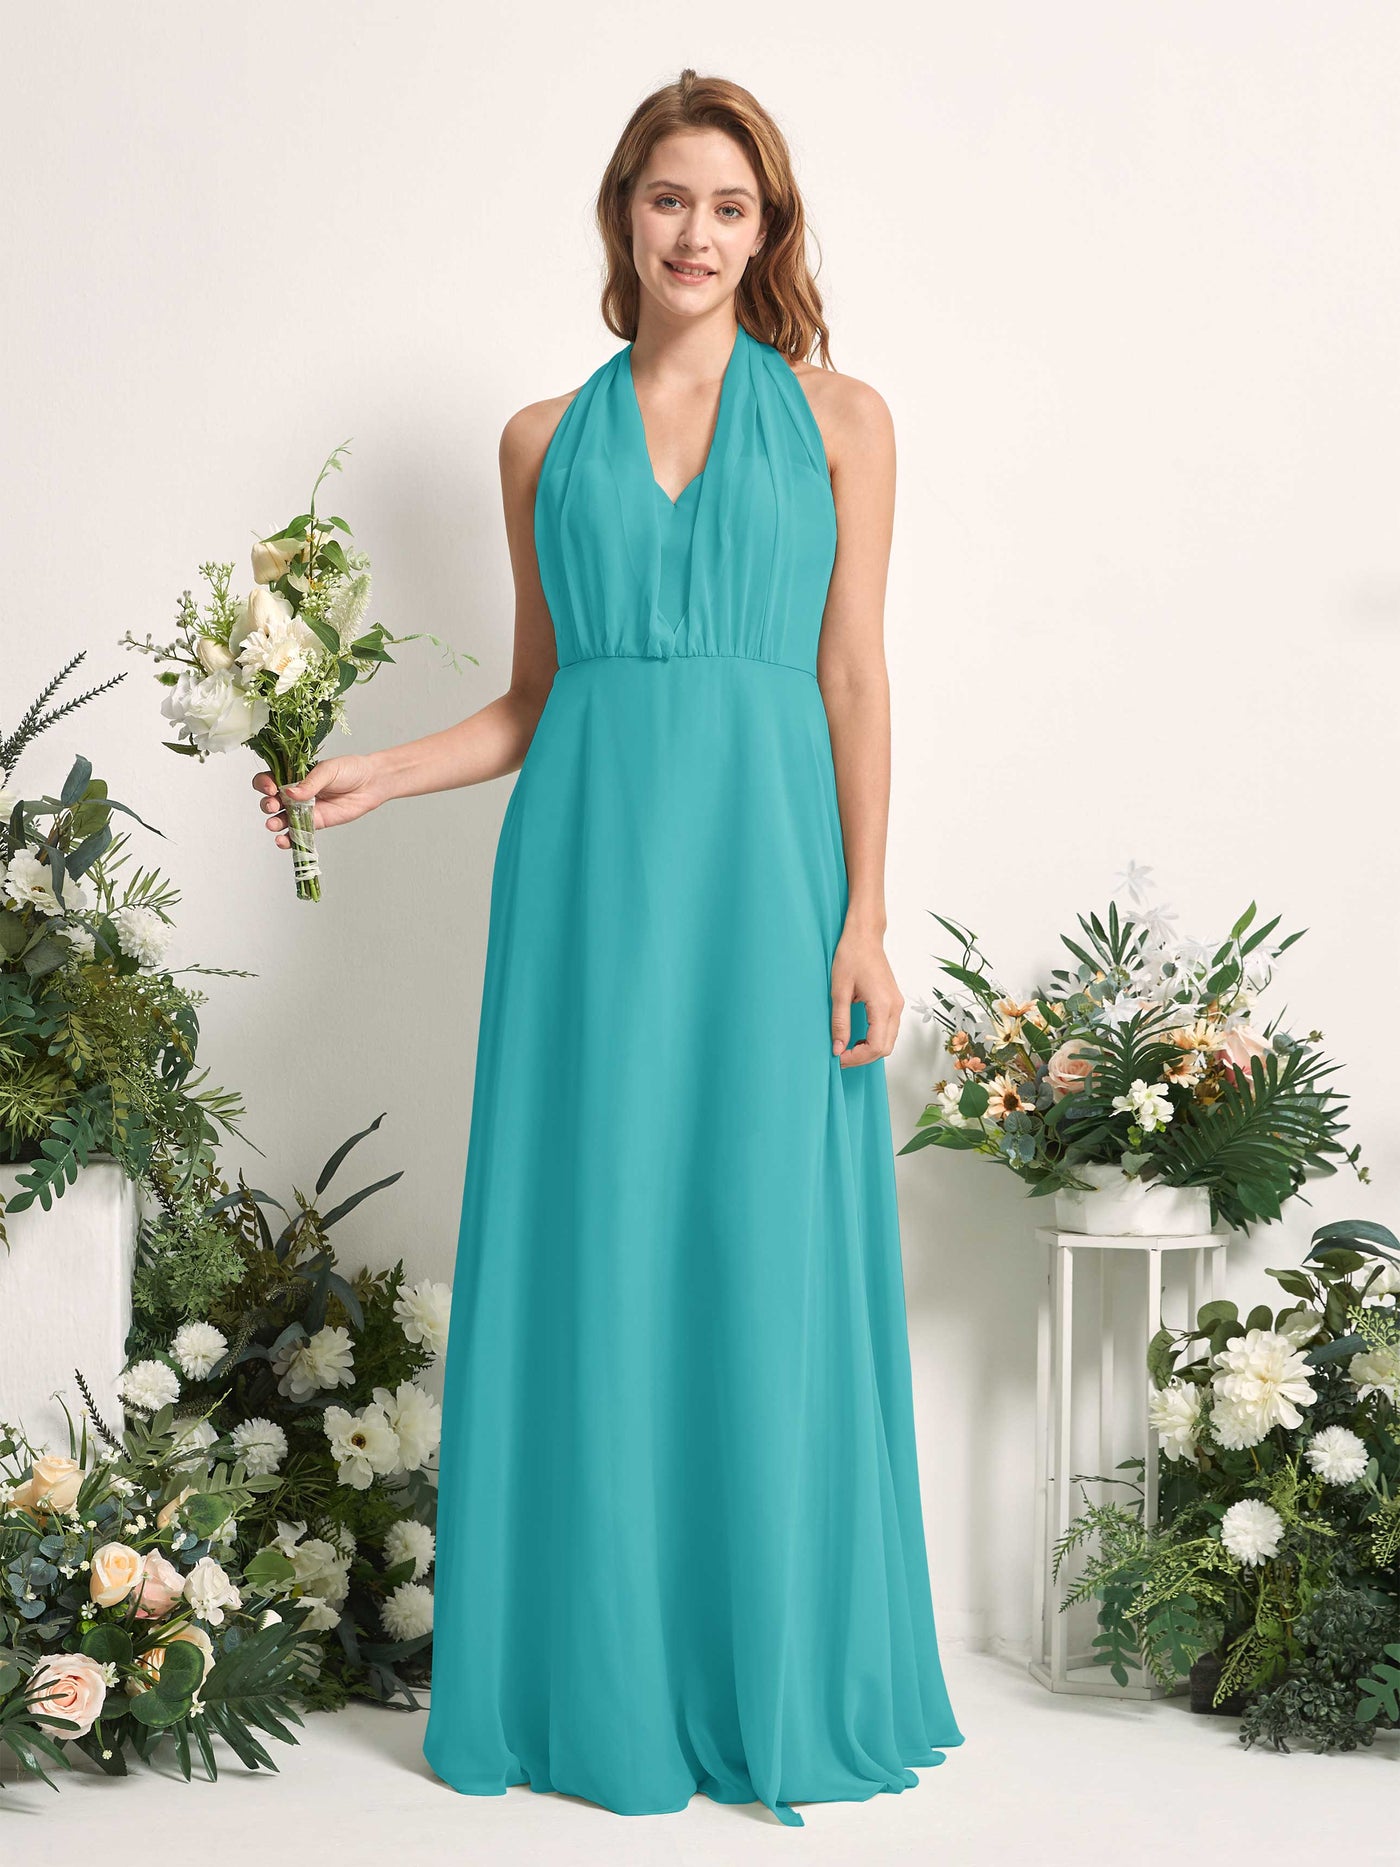 Bridesmaid Dress A-line Chiffon Halter Full Length Short Sleeves Wedding Party Dress - Turquoise (81226323)#color_turquoise